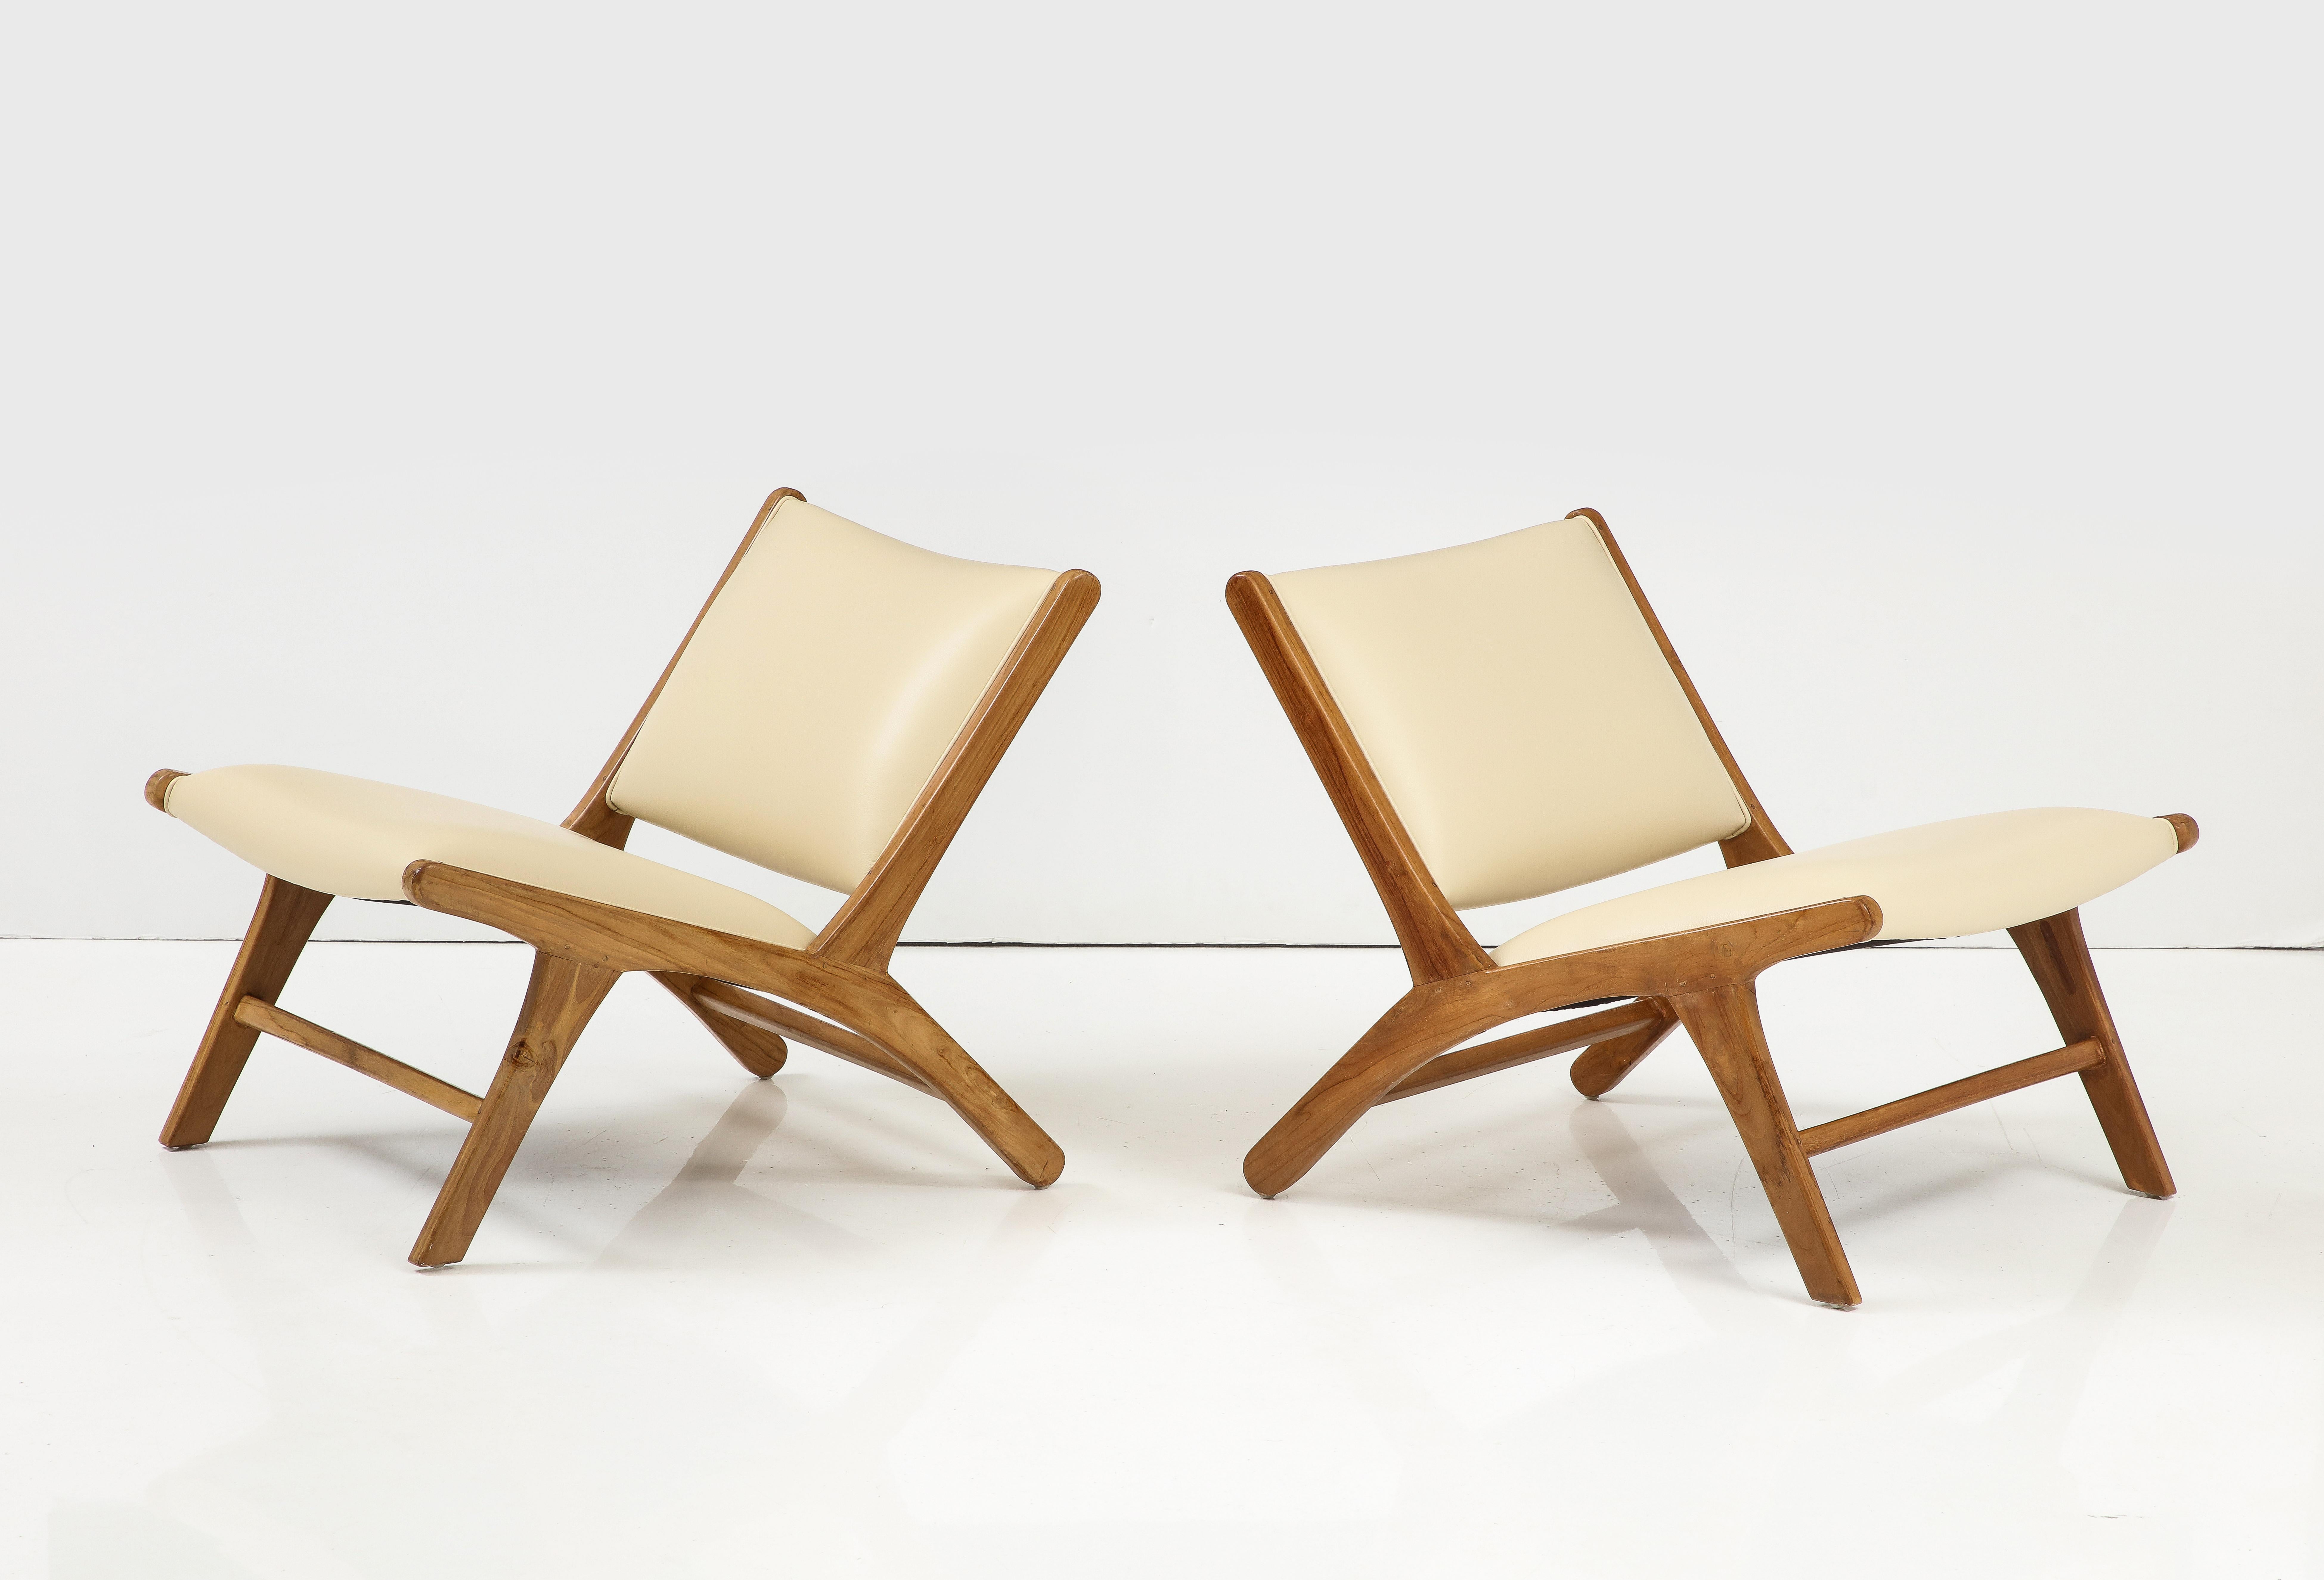 A striking and sleek pair of lounge chairs designed by Olivier De Schrijver, the Belgian contemporary artist, who was born in 1958. Newly re-finished and re-upholstered in a butter colored Italian leather. 
By Olivier De Schrijver, signed and